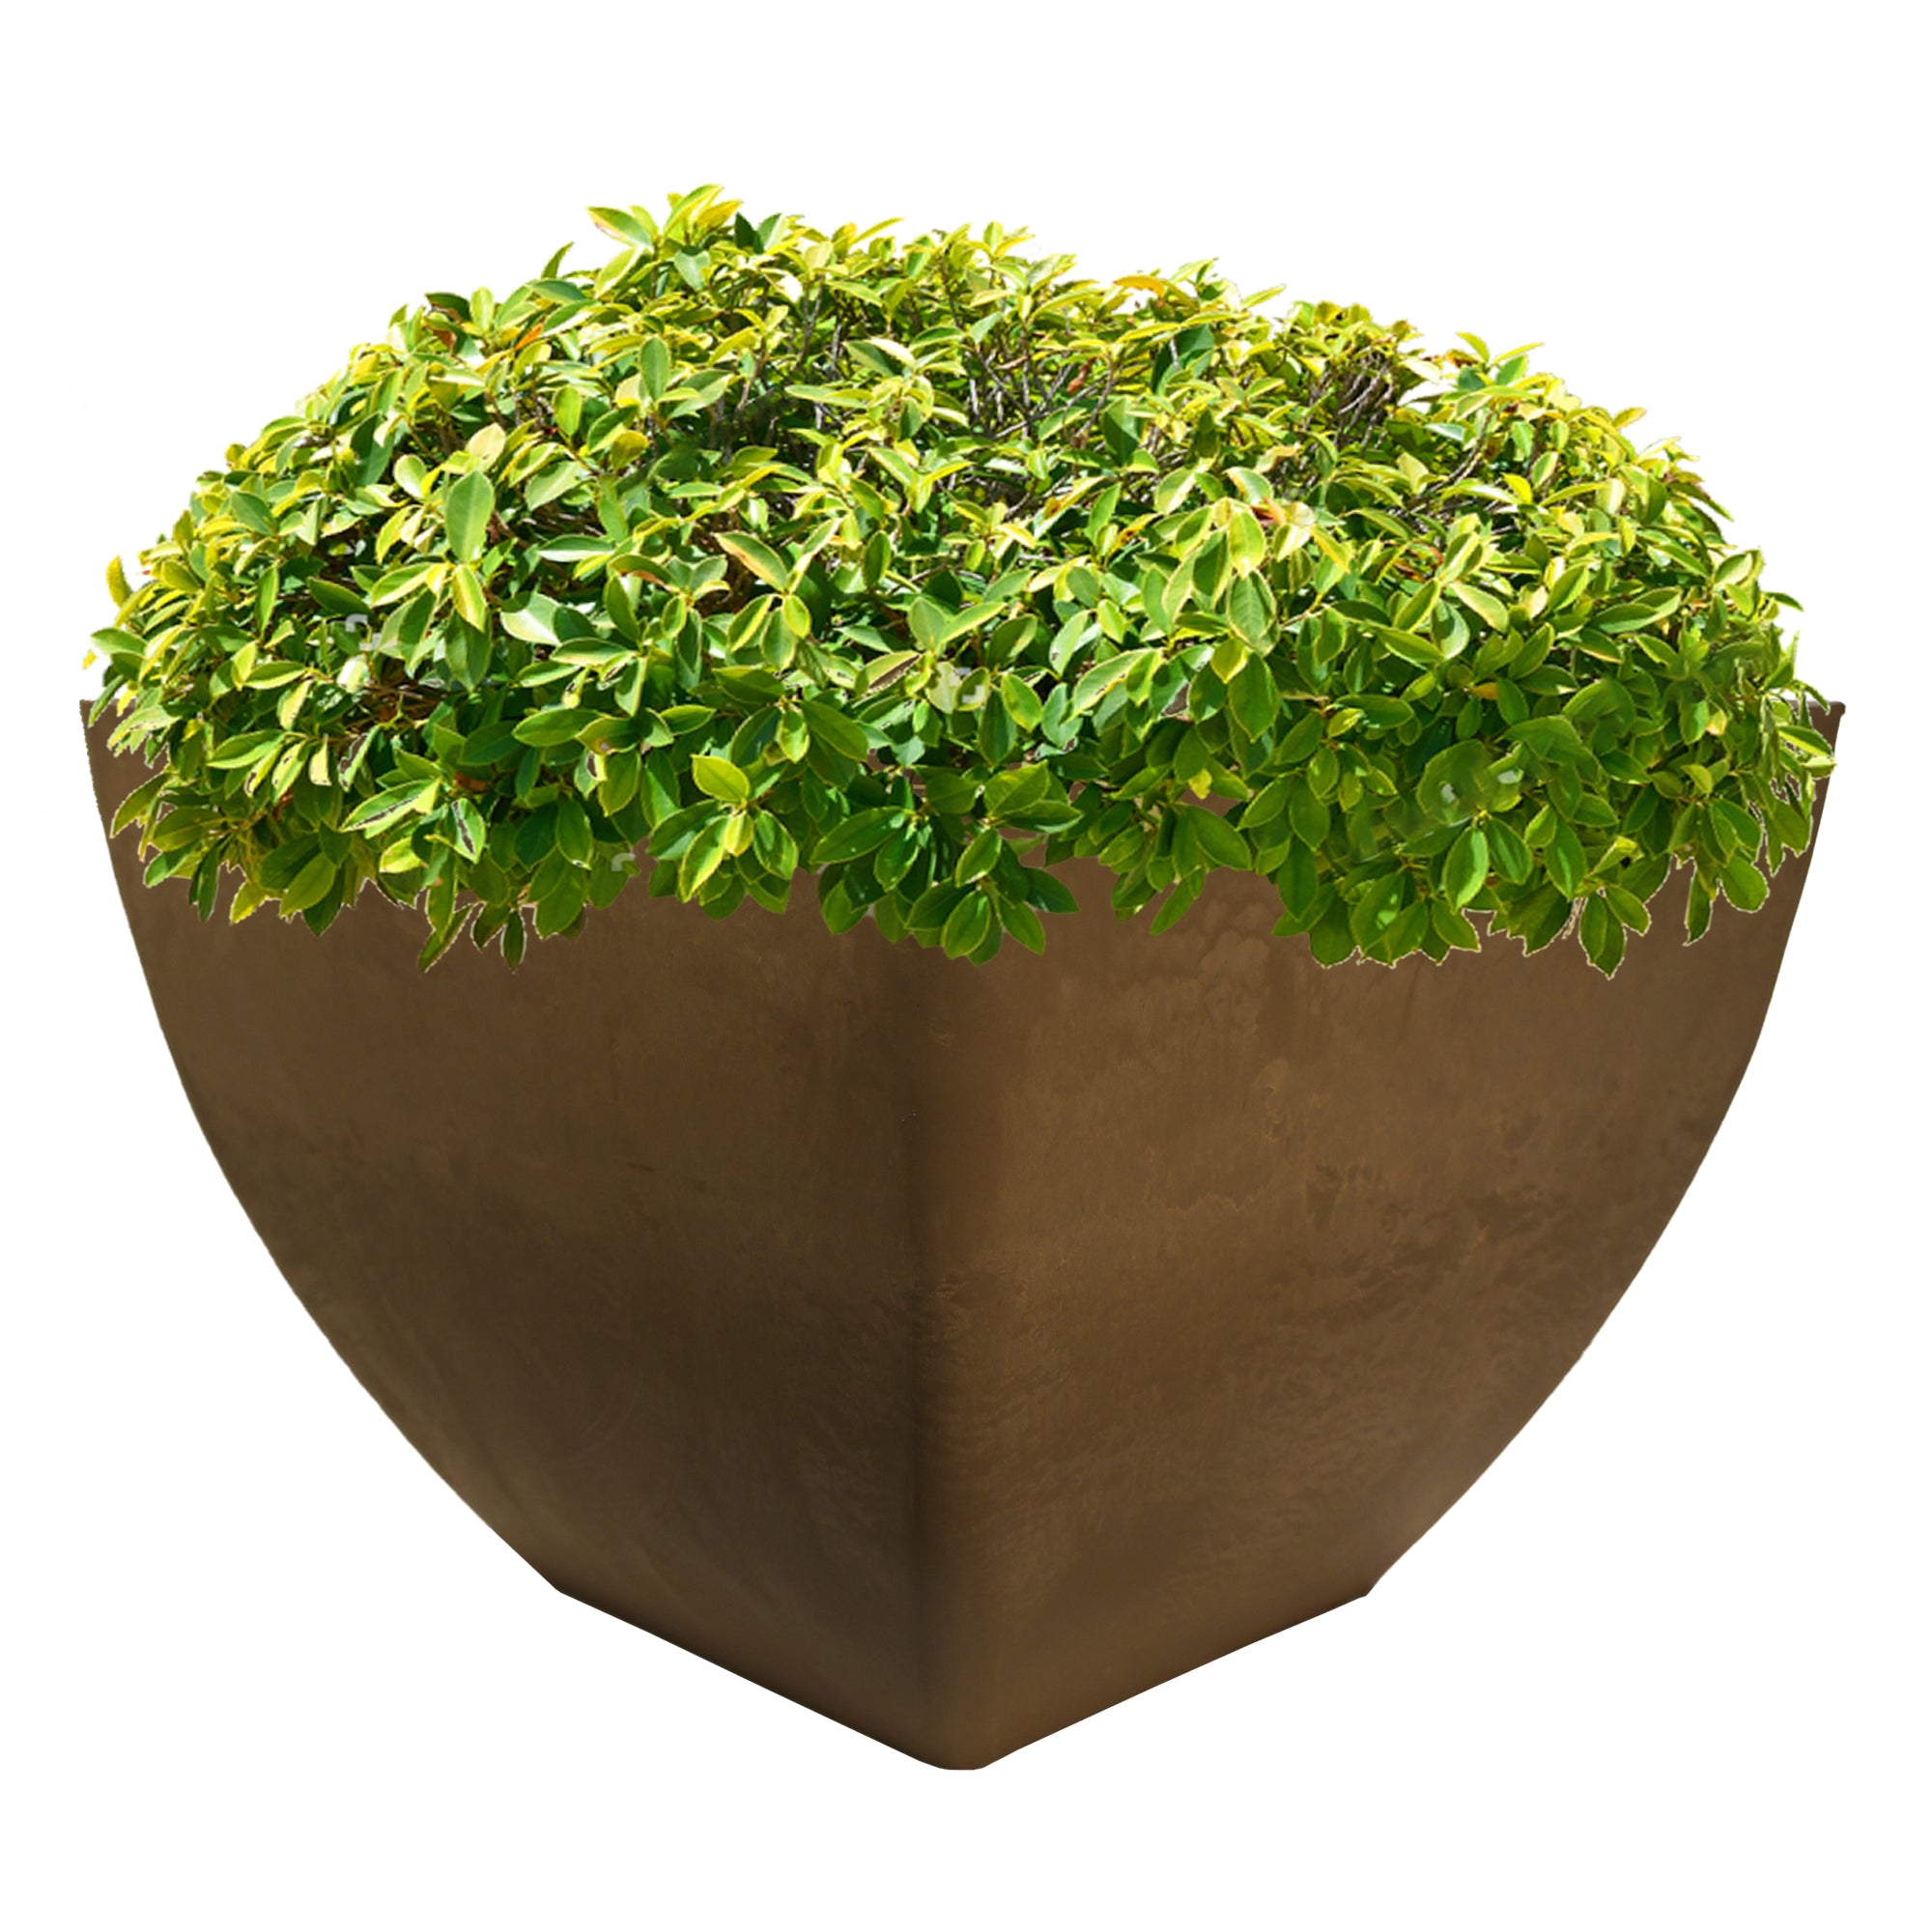 20 inch square planter in oak with green plant inside on a white background